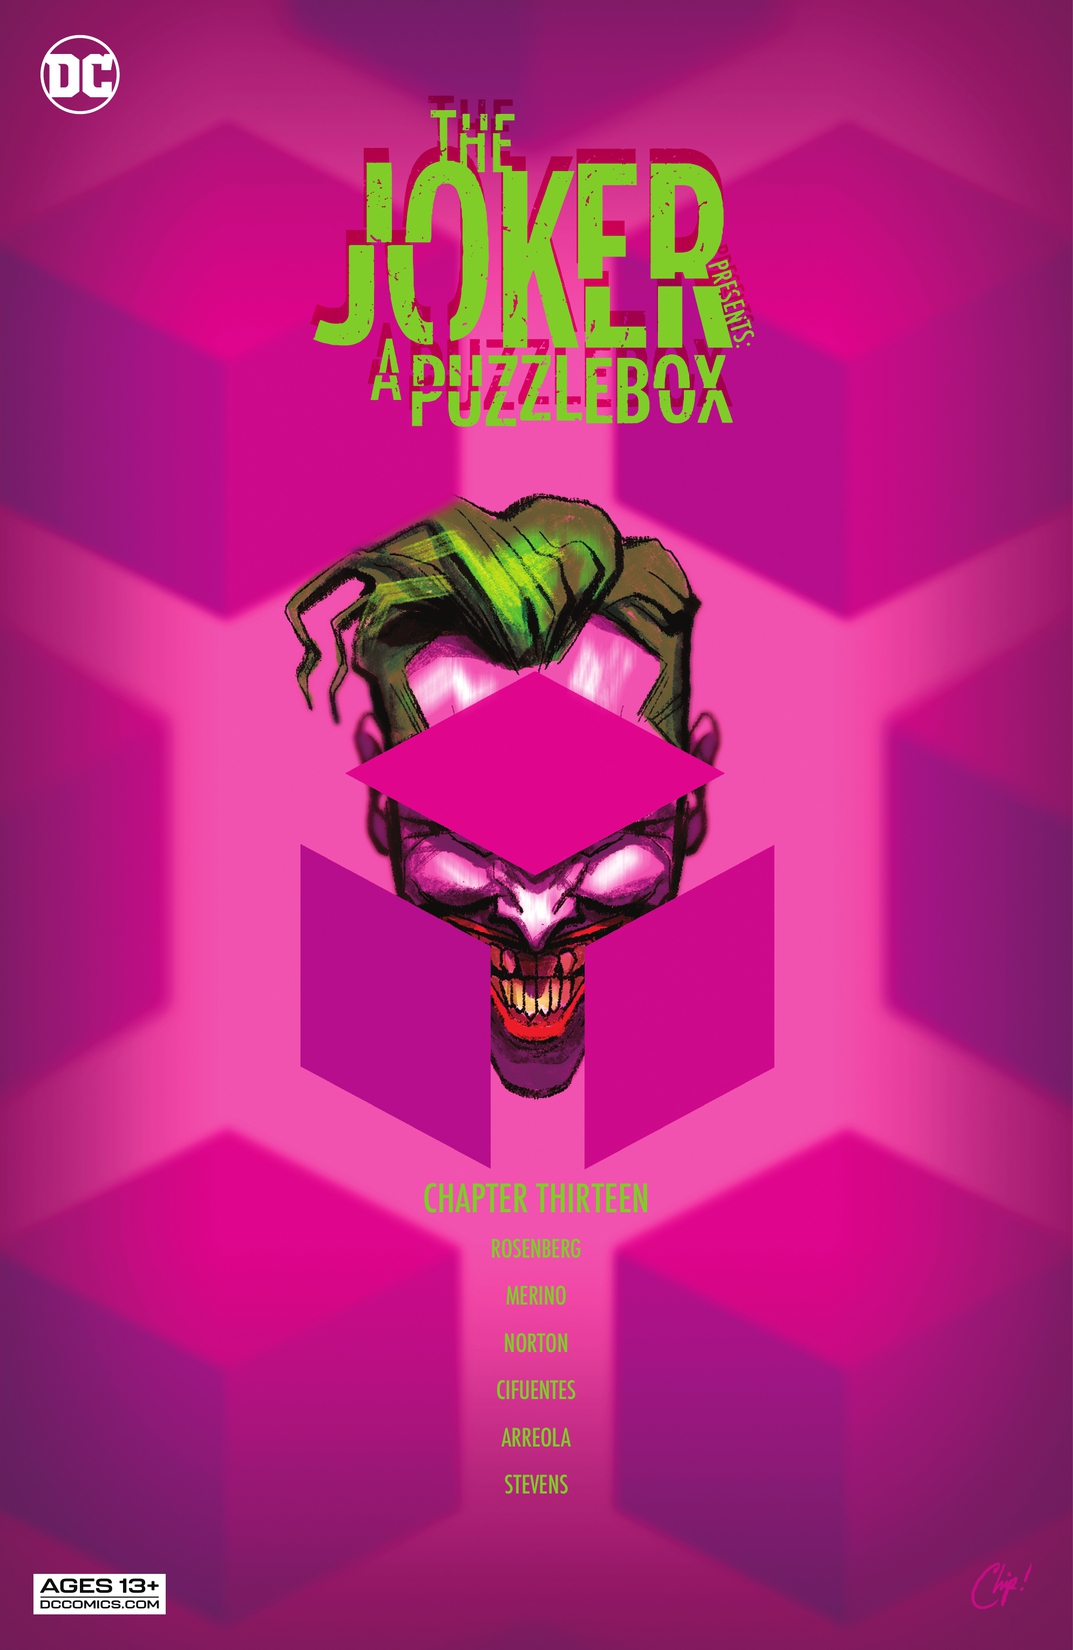 The Joker Presents: A Puzzlebox Director's Cut #13 preview images